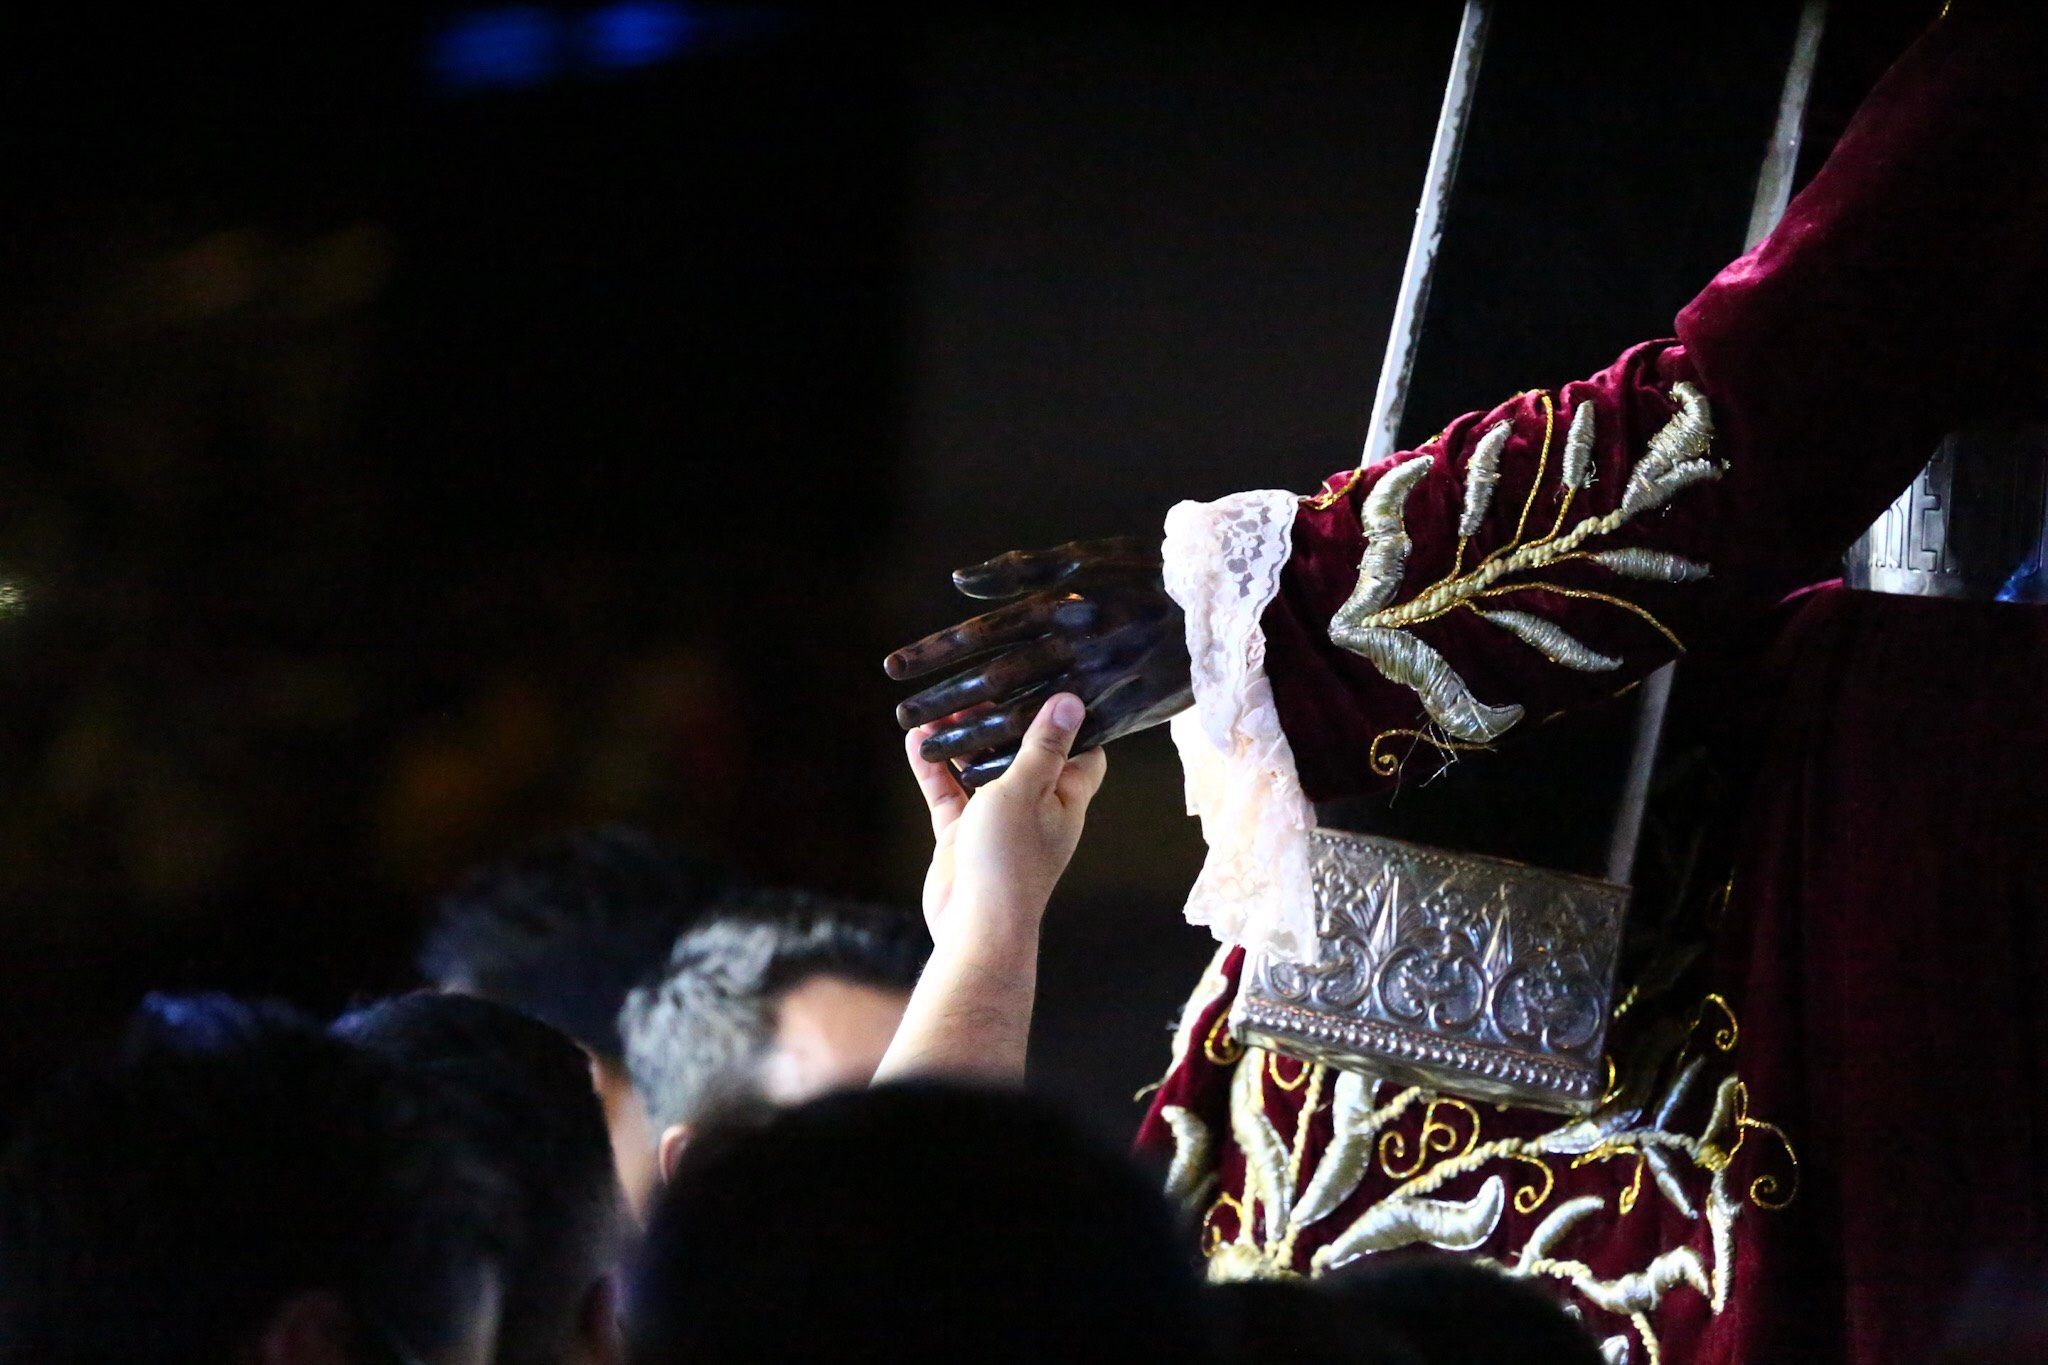 I BELIEVE. A devotee reaches out to the hand of the image of the Black Nazarene. Photo by Jire Carreon  